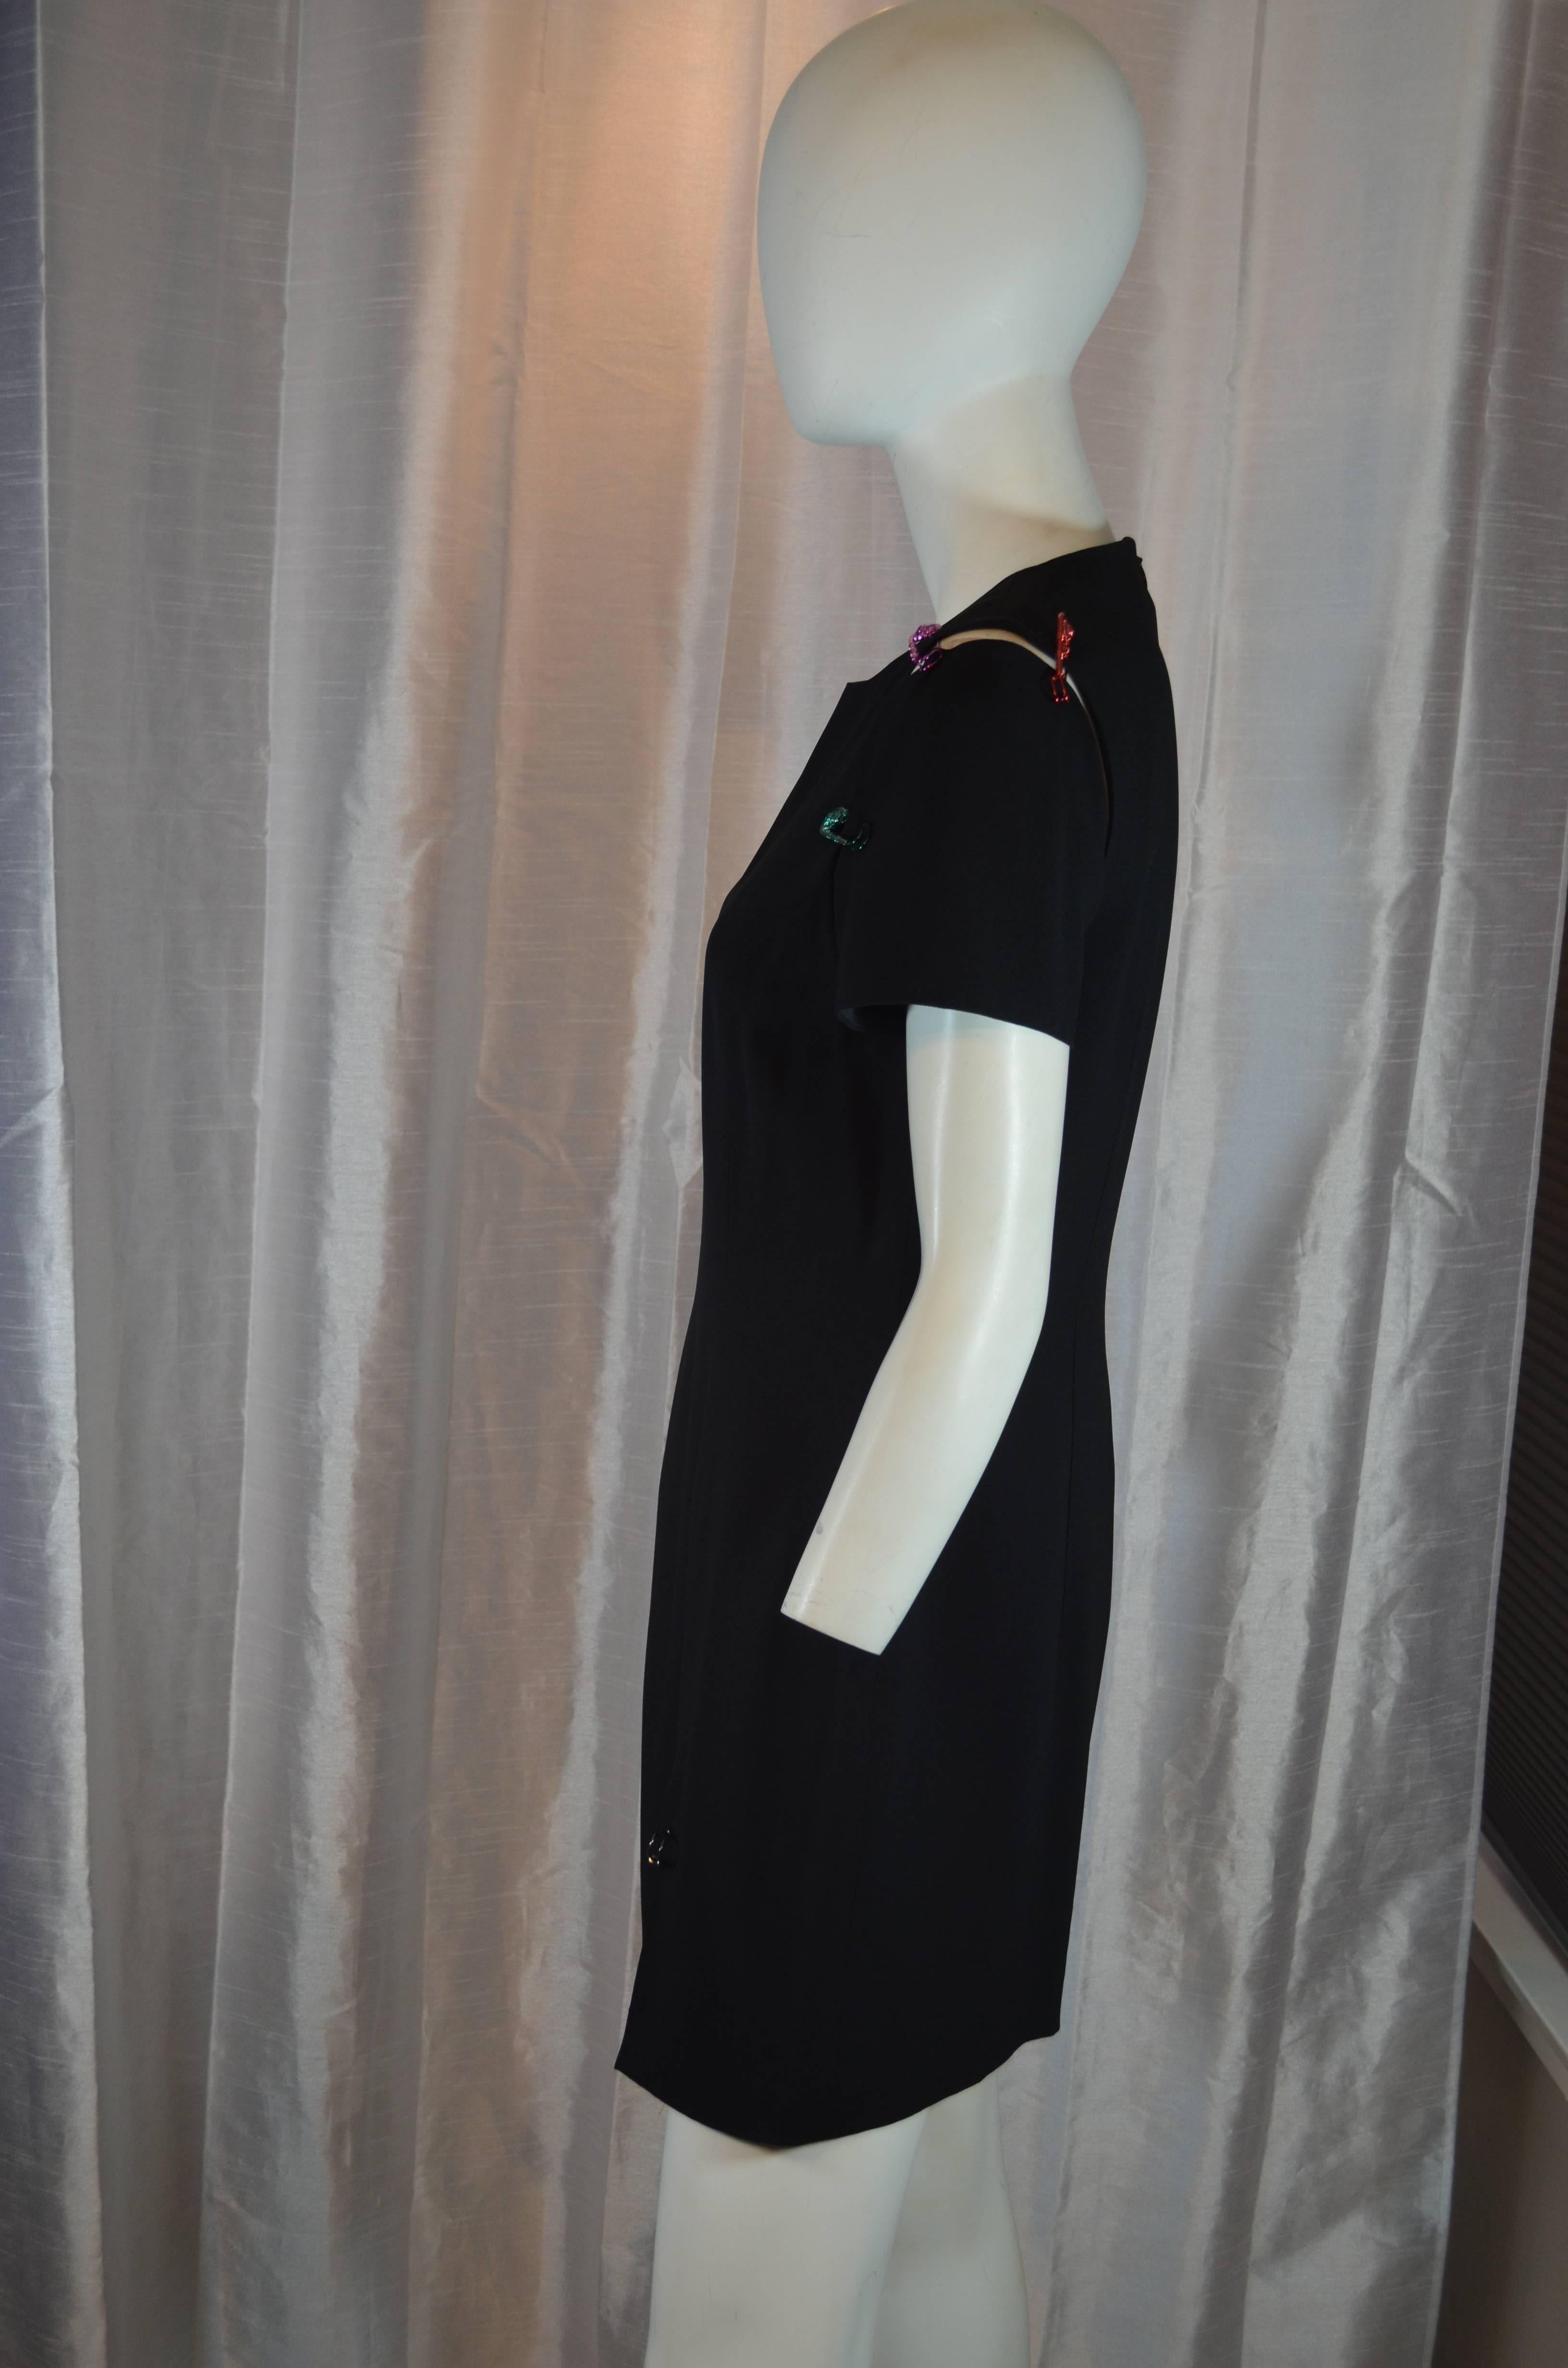 Versus Versace Safety Pin Dress In Excellent Condition In Carmel, CA